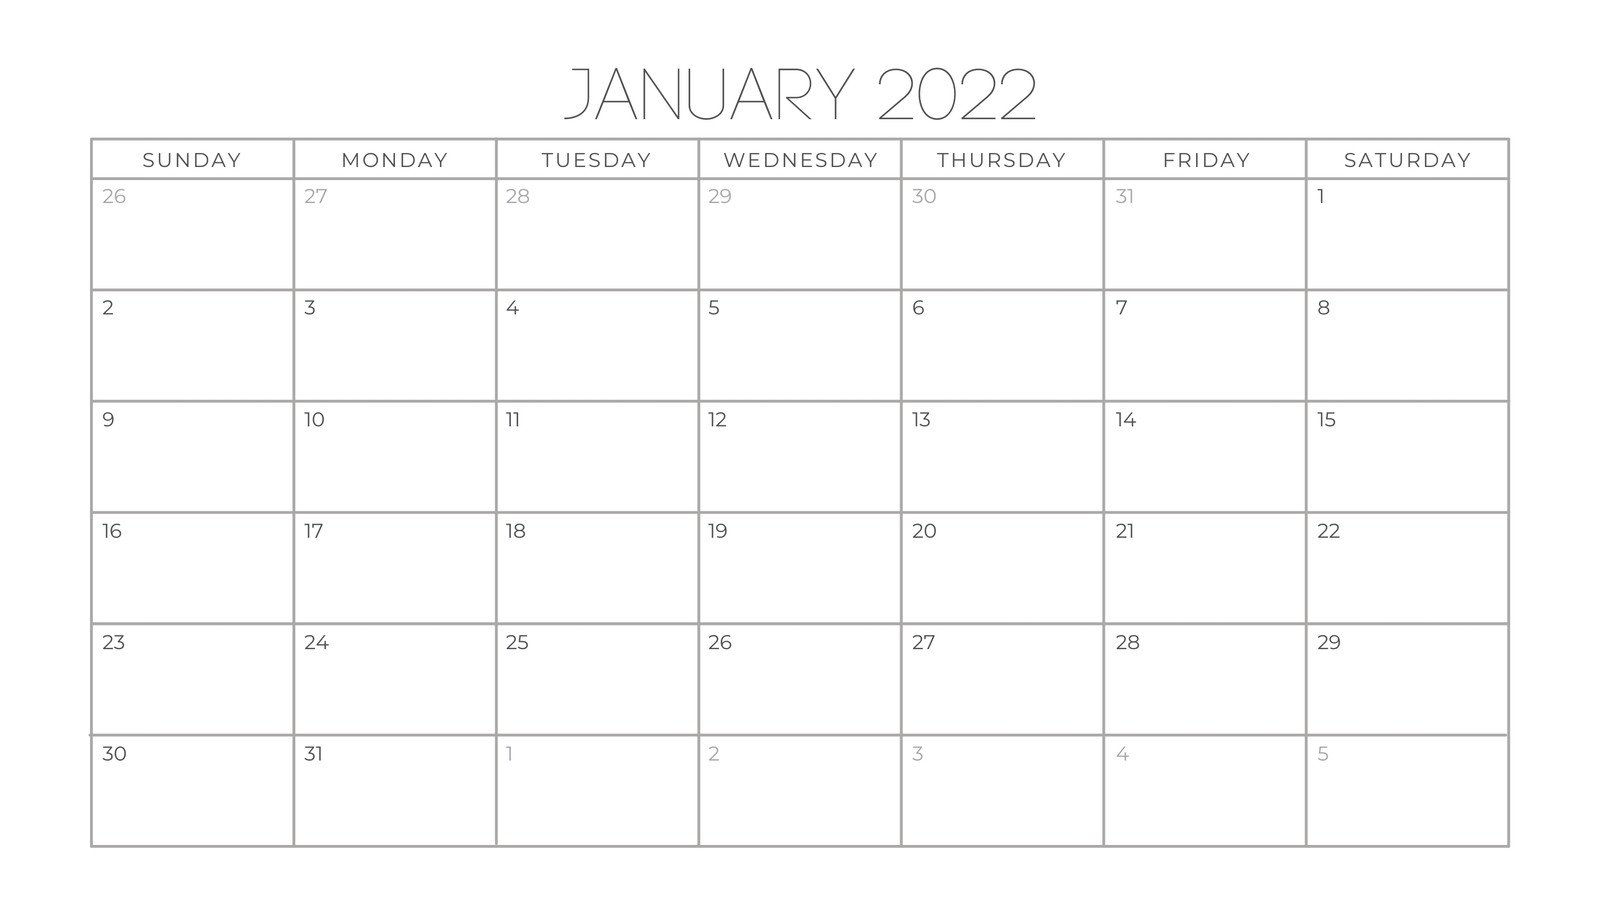 Monthly Schedule Template 2022 Free, Printable, Customizable Monthly Calendar Templates | Canva